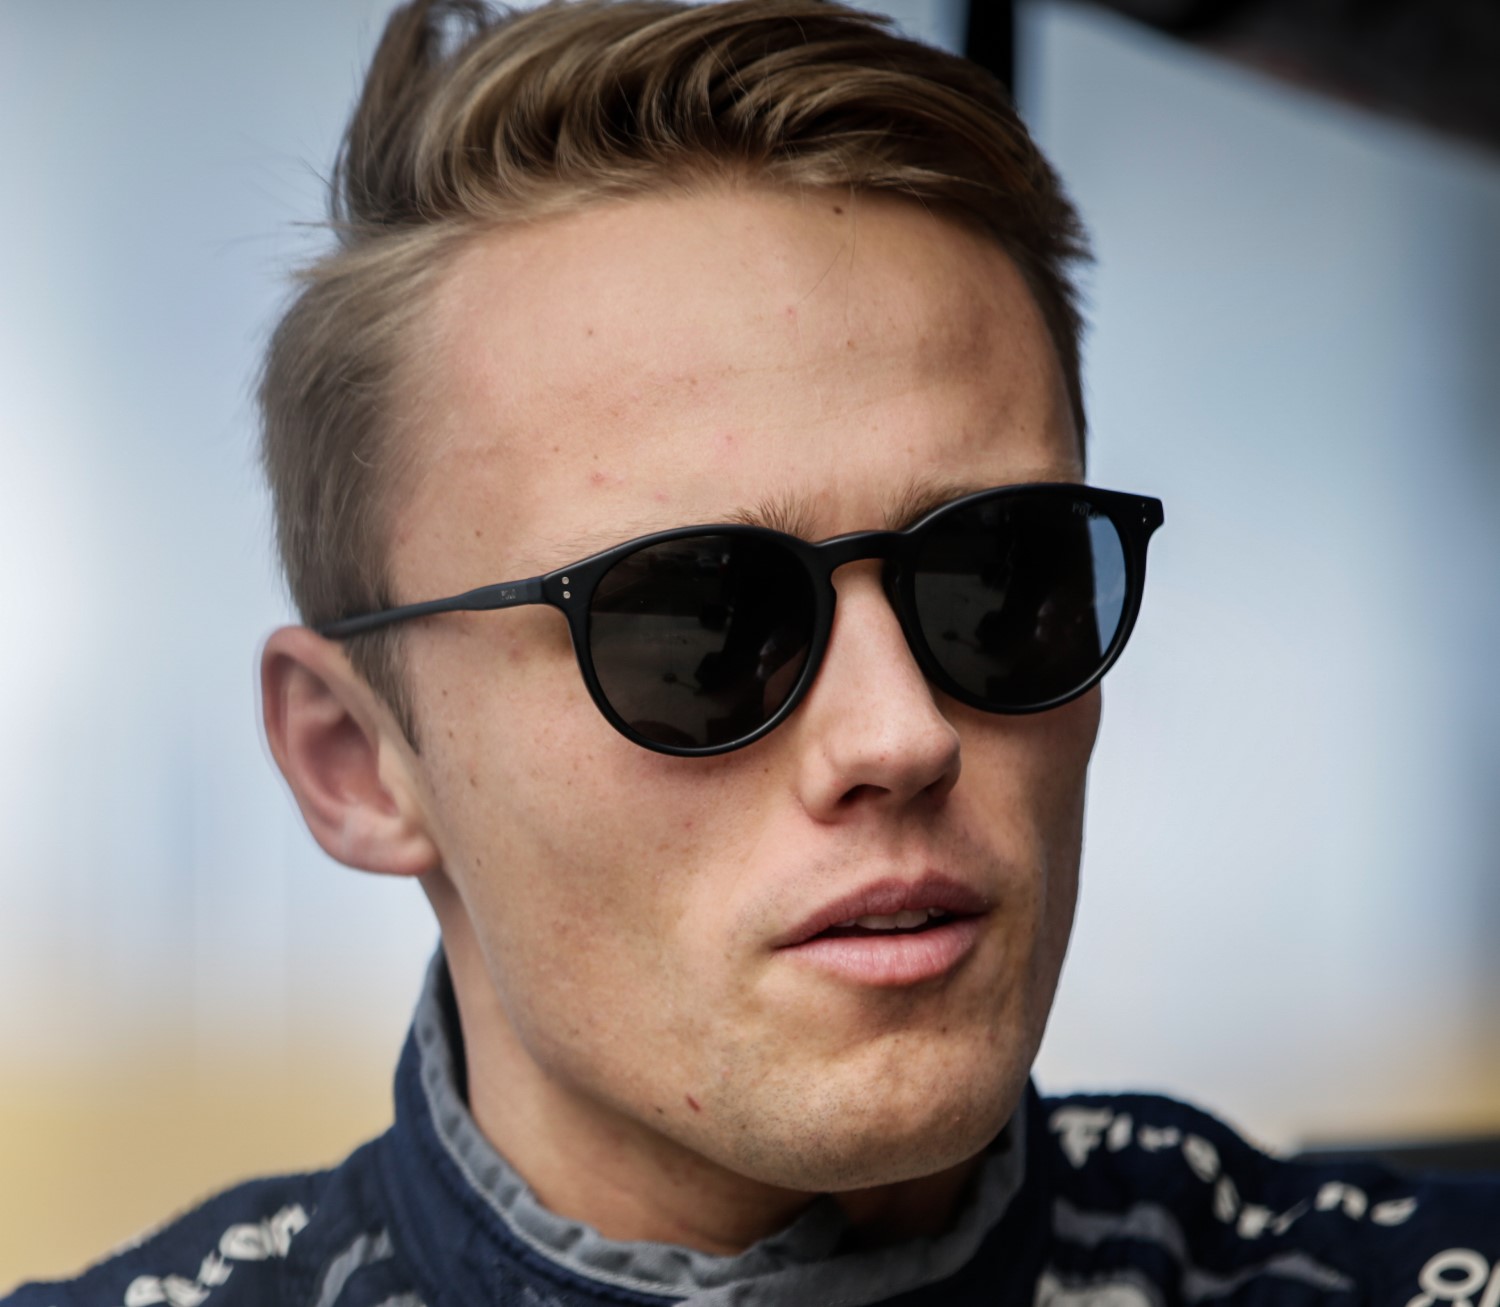 Max Chilton says F1 is not a sport. AR1.com has said for years, F1 is an engineering exercise not a sport with Aldo Costa being the best engineer.